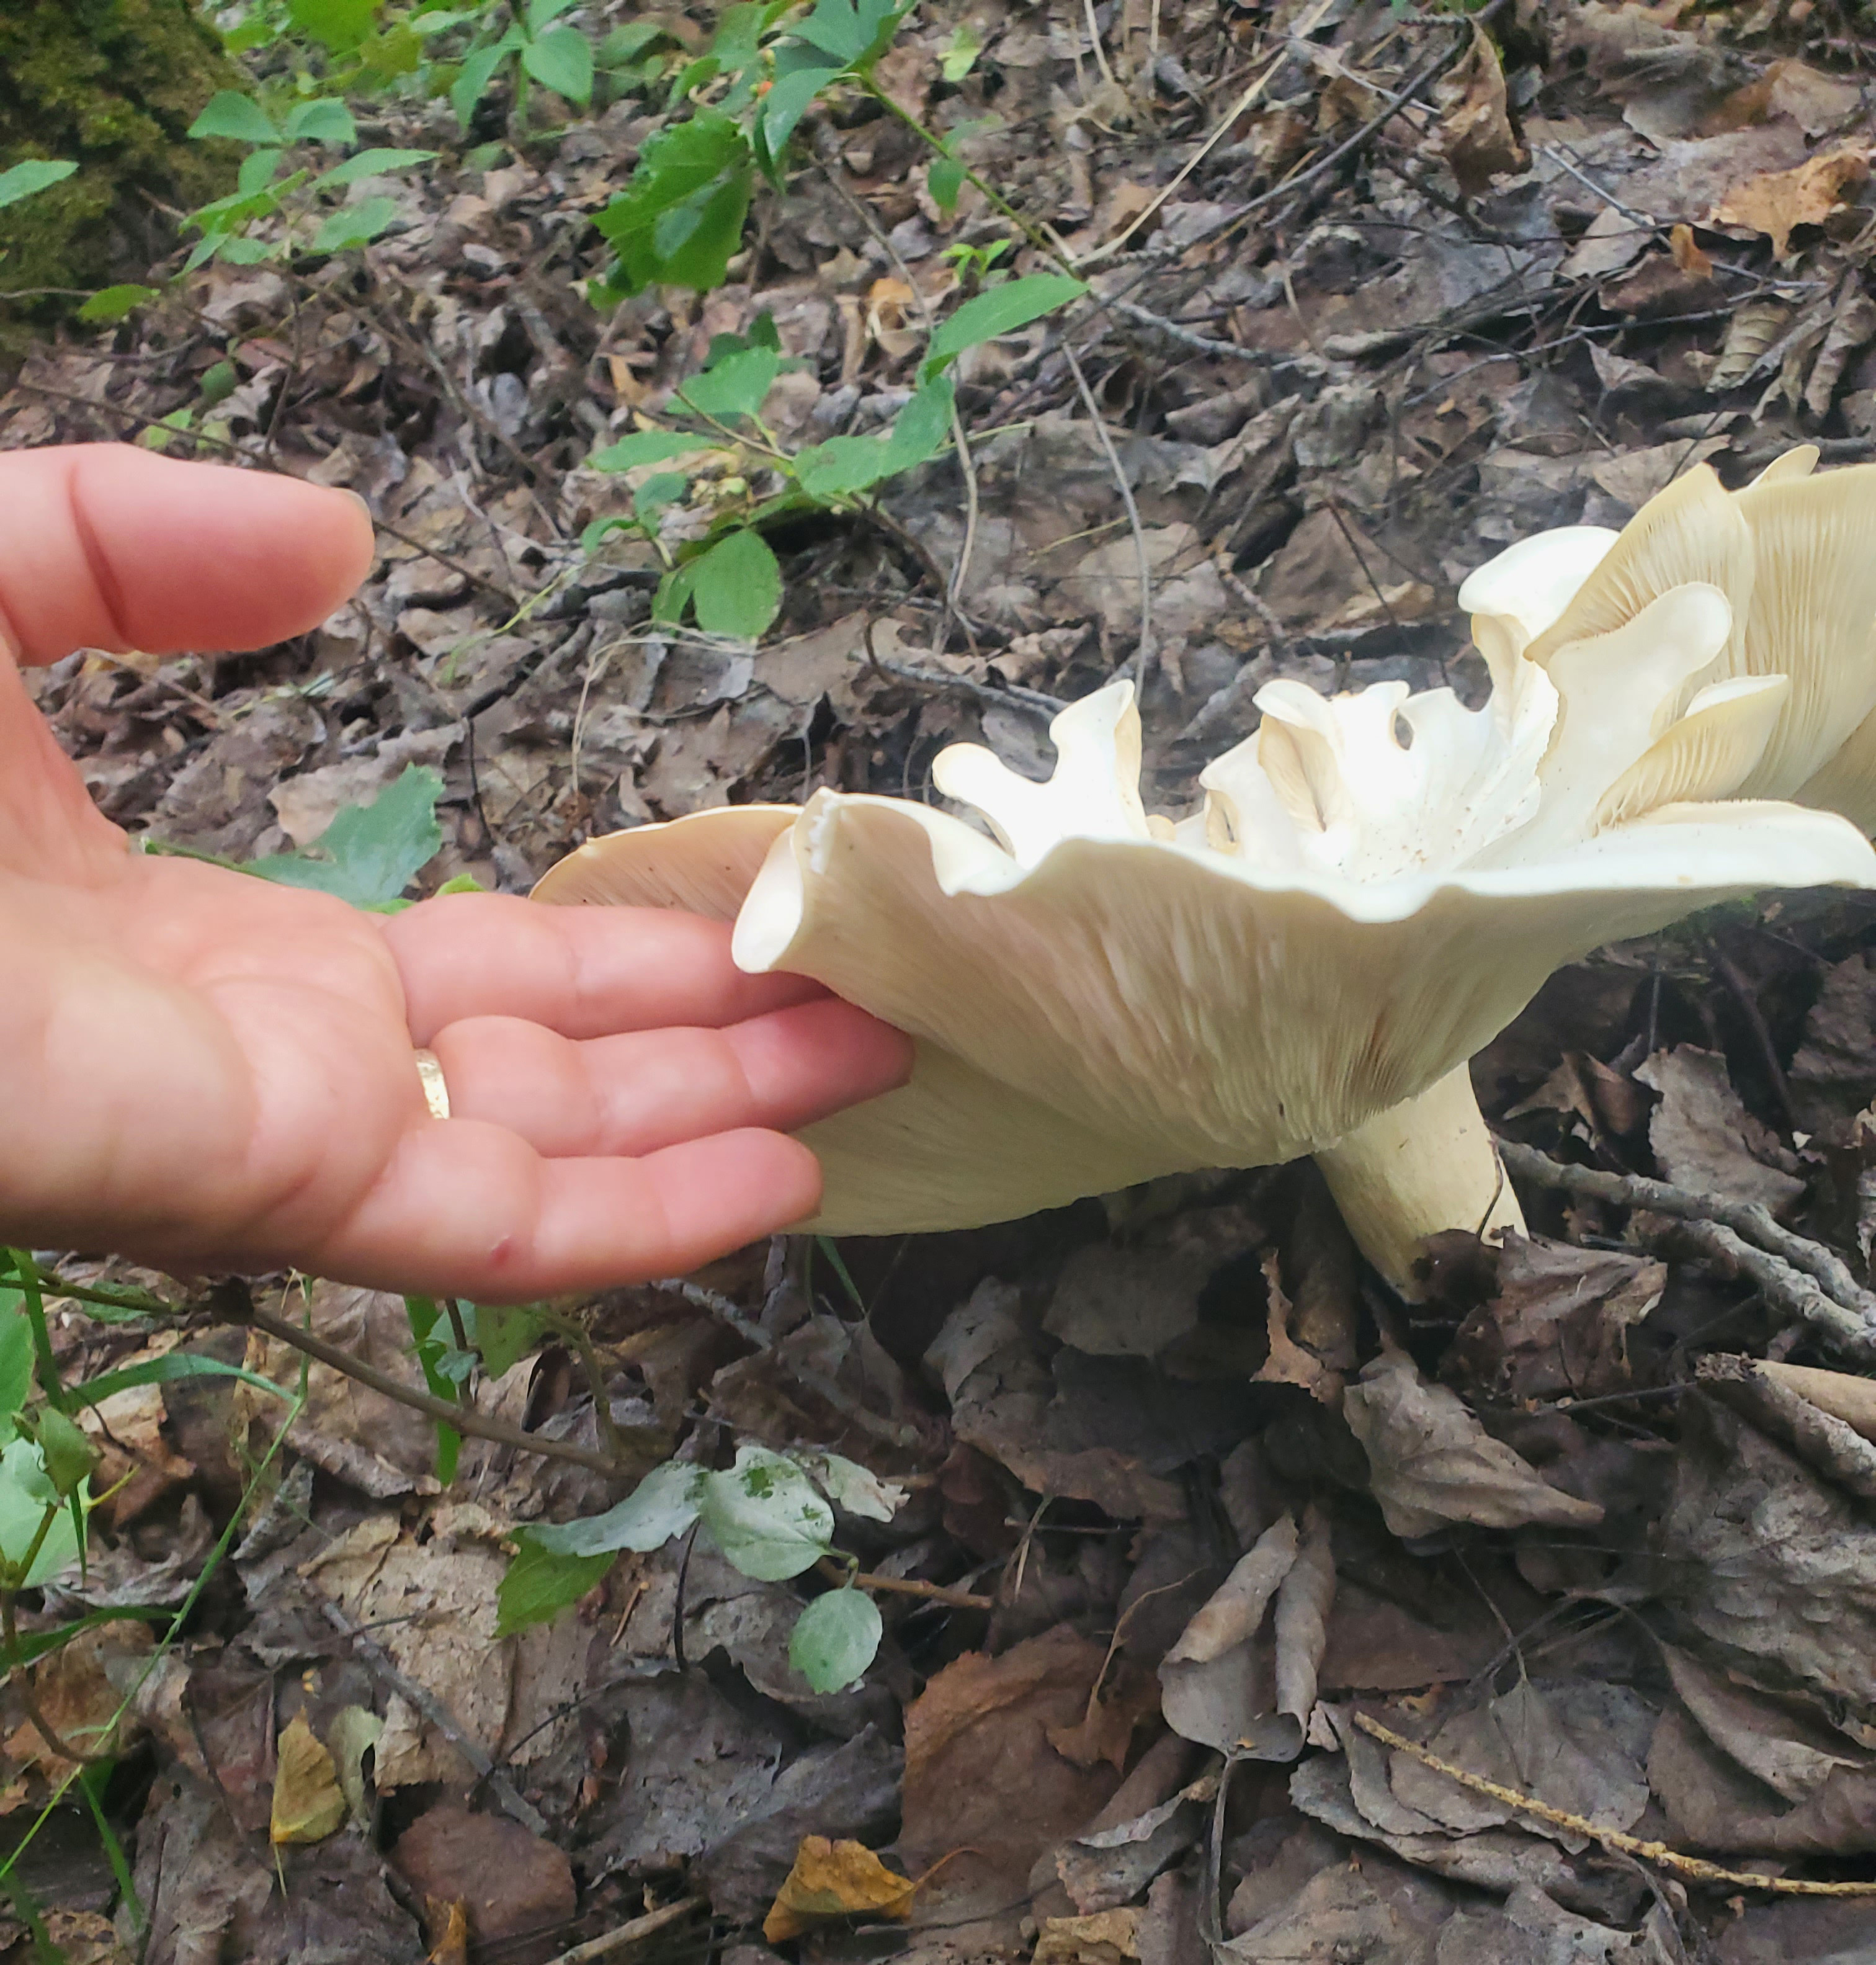 A person's hand gently touches the edge of a showy white mushroom on  ground covered with fallen brown leaves.